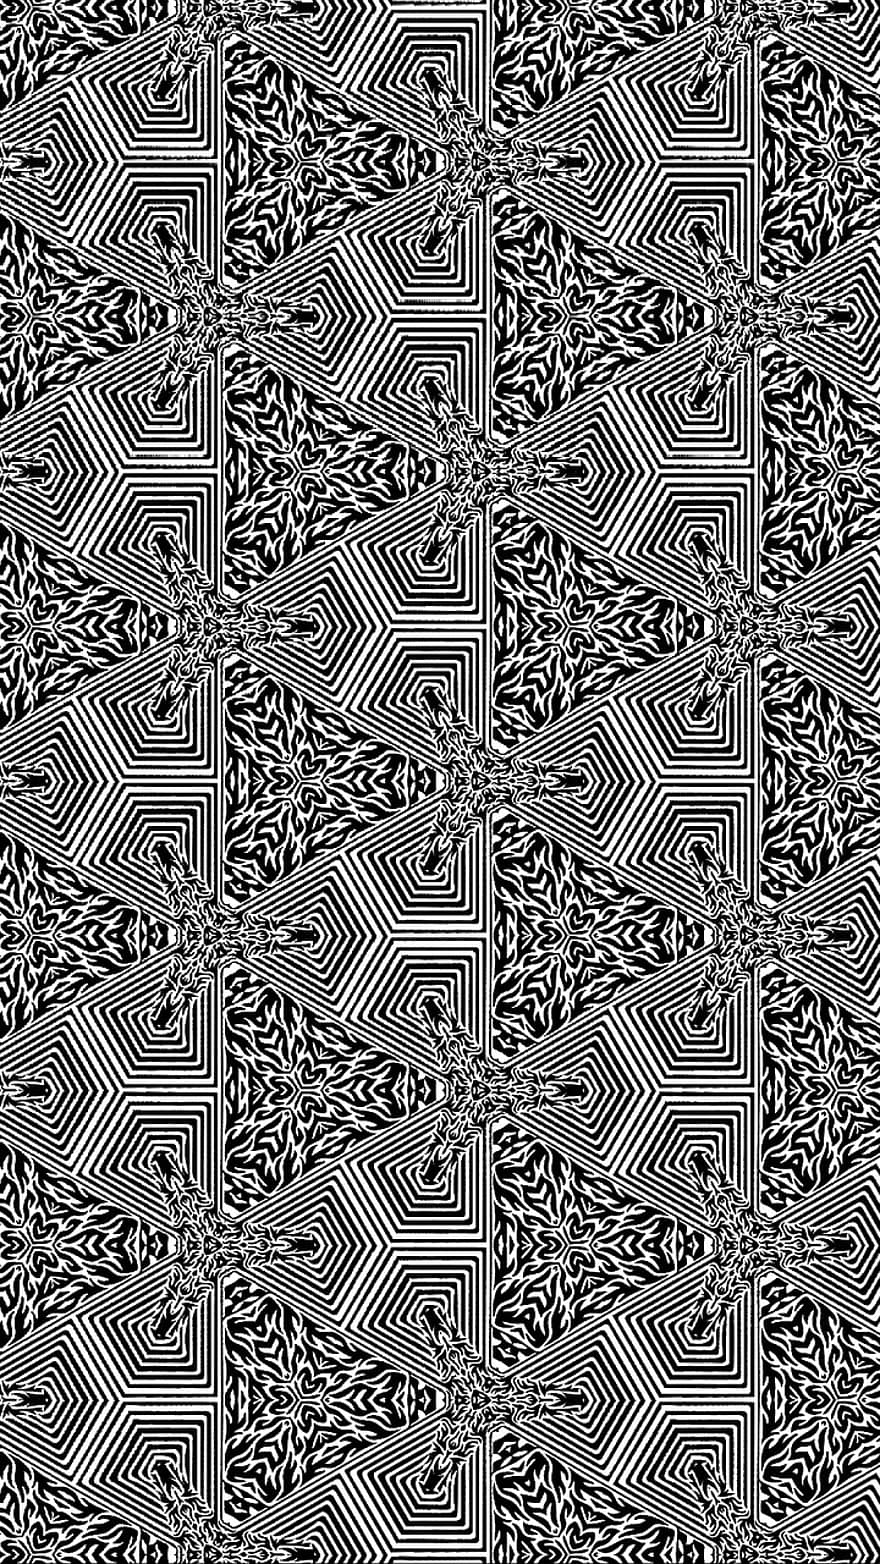 Repeating, Seamless, Pattern, Backdrop, Texture, Repeat, Design, Tile, Decoration, White, Black